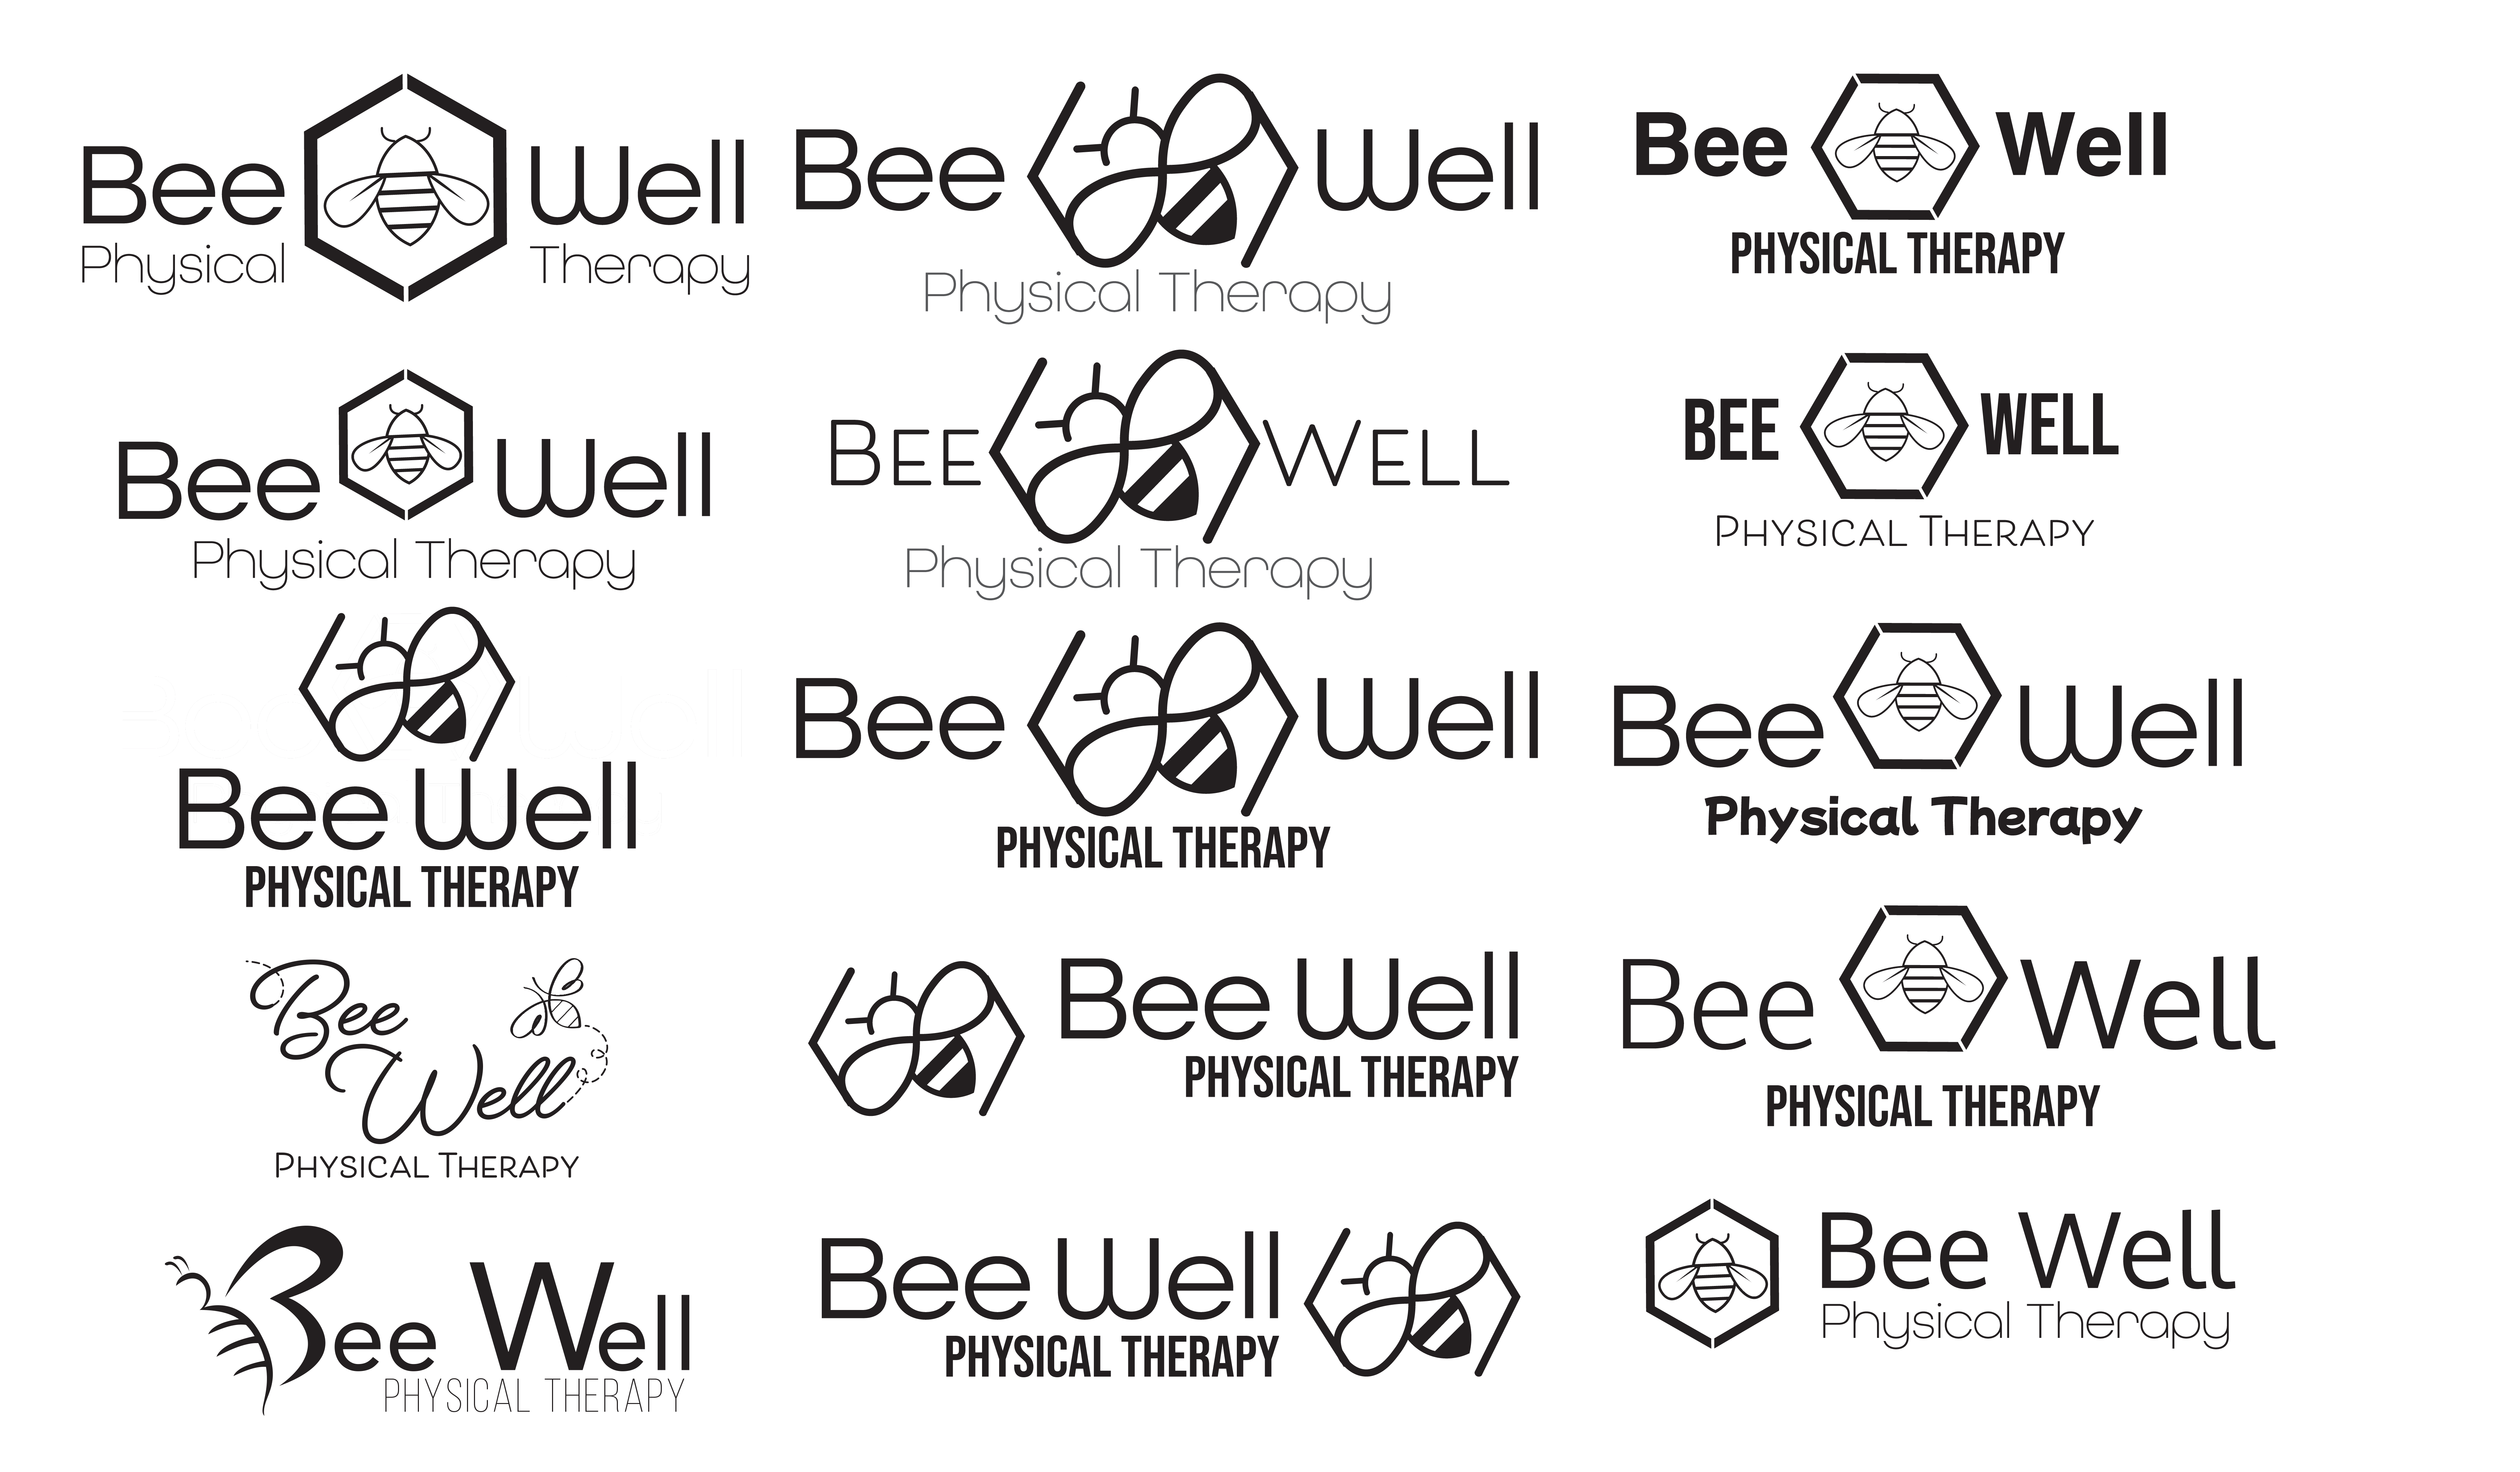 The Orginal Concepts for Bee Well's logo